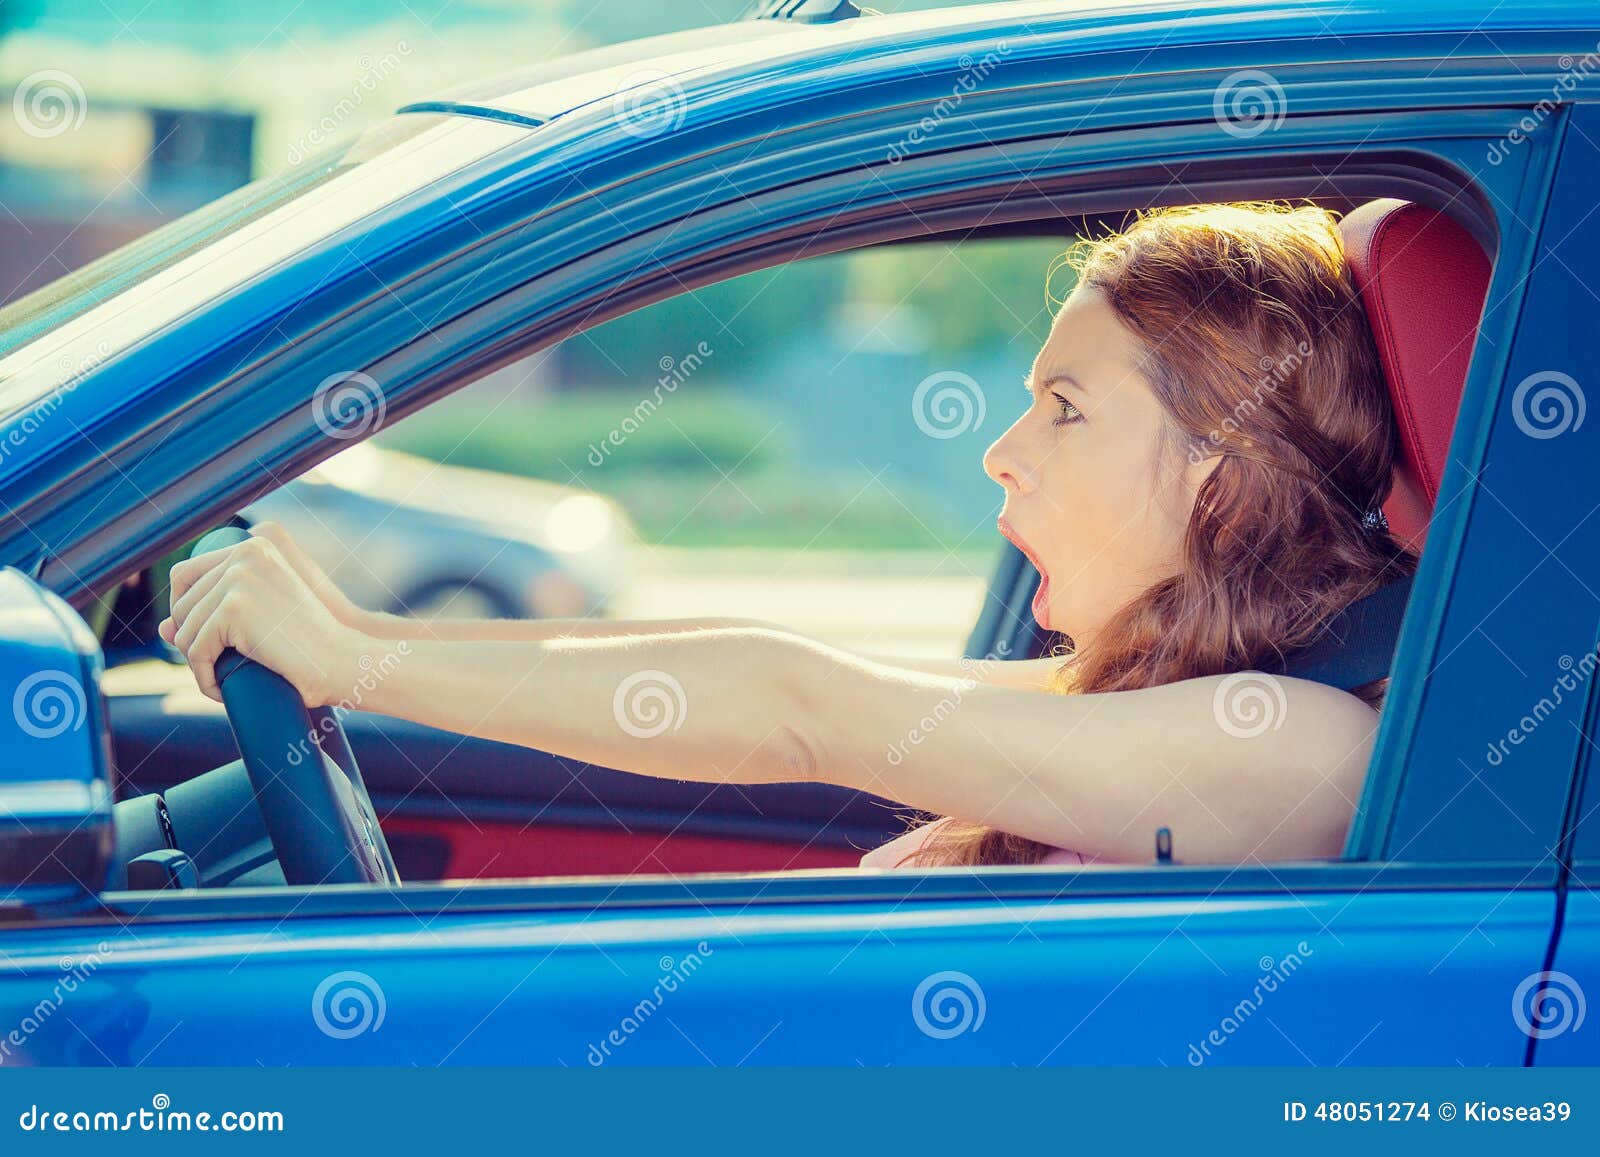 fright face woman driving car wide open mouth eyes screaming